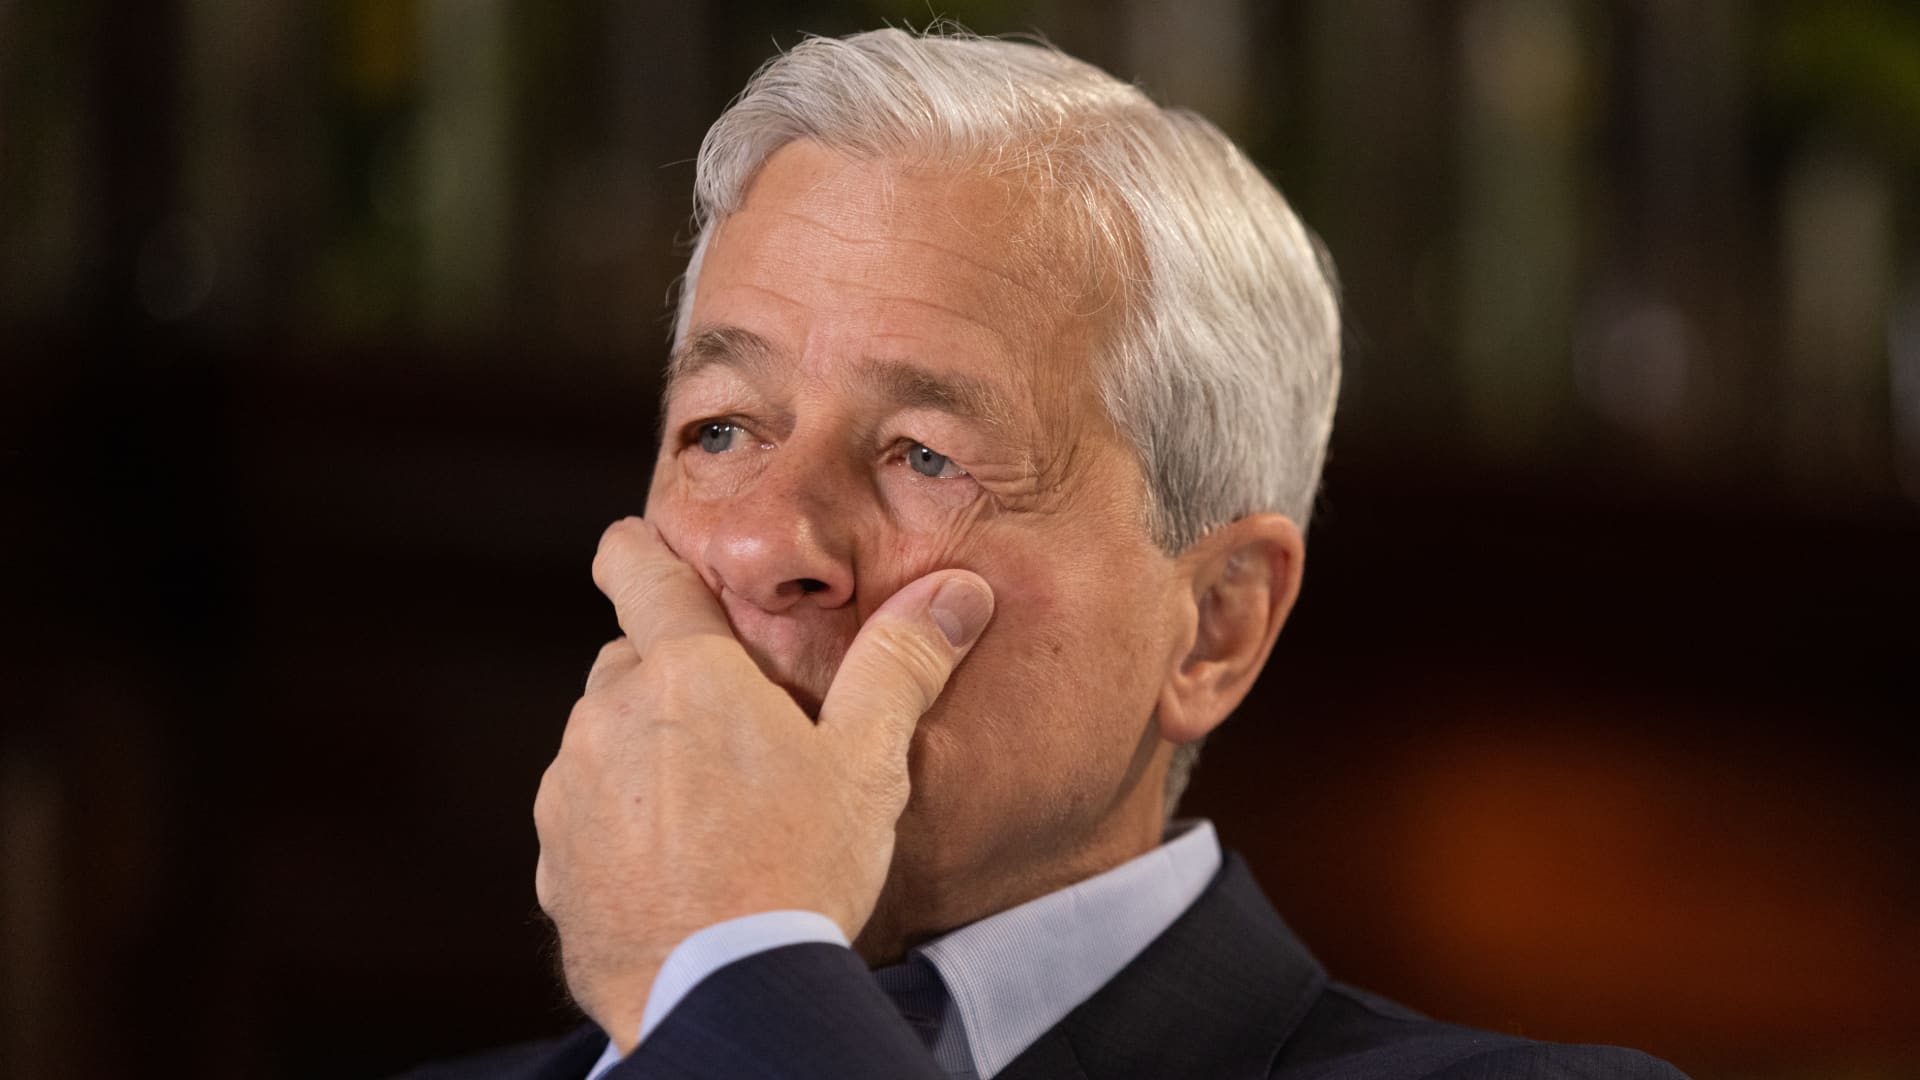 Jamie Dimon says expect 'other surprises’ from choppy markets after U.K. pensions nearly imploded